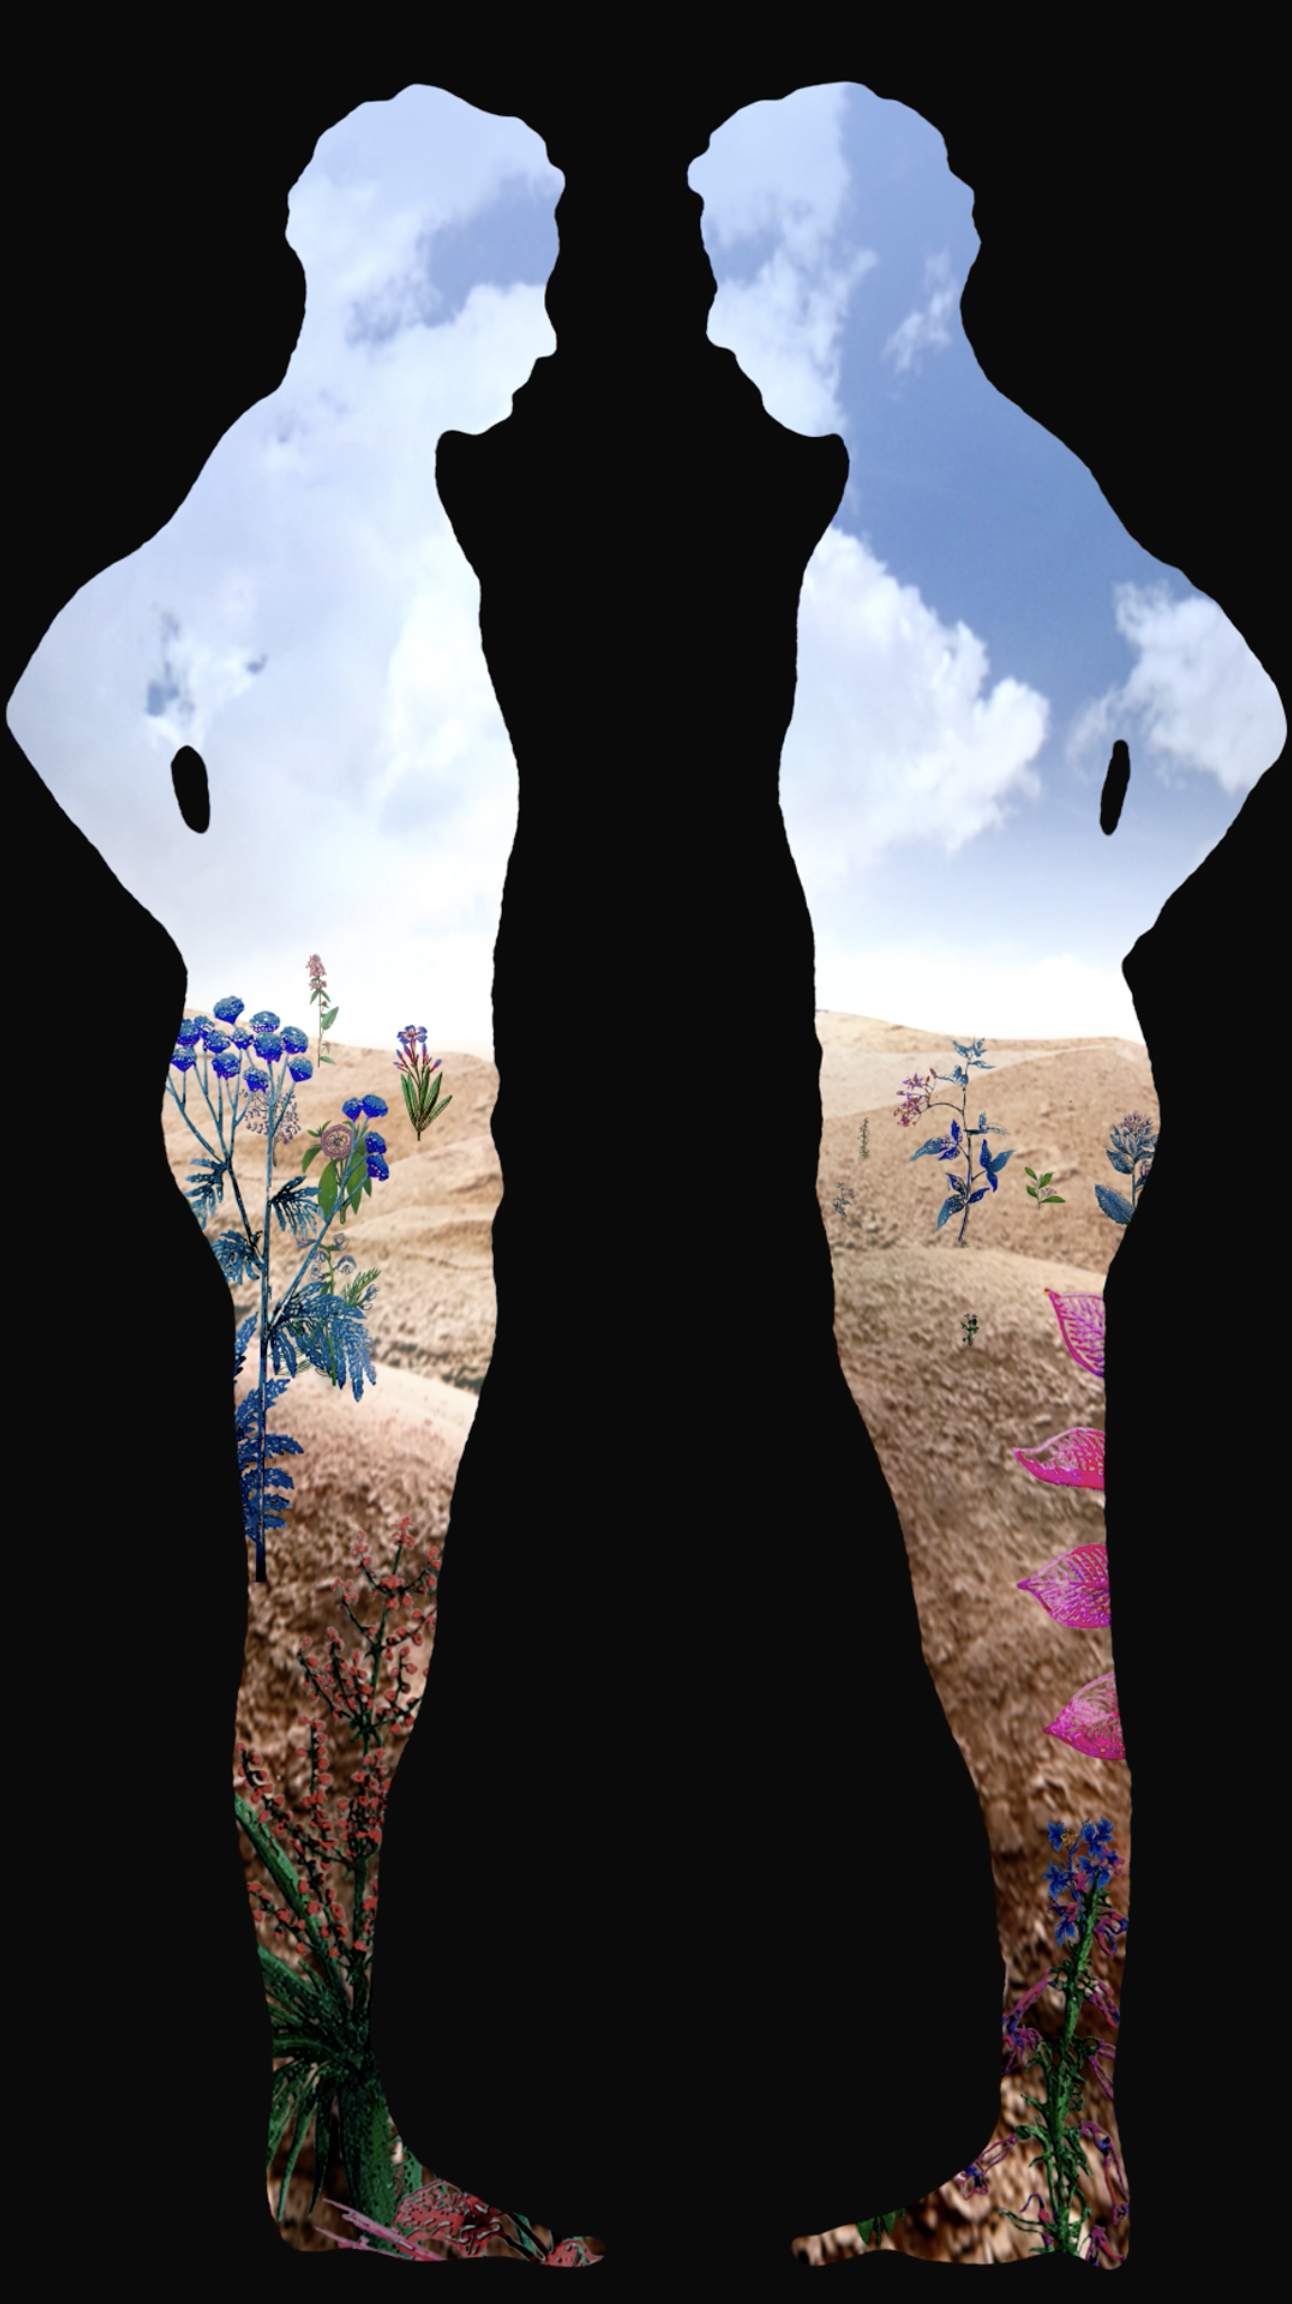 A pair of human silhouettes face each other in front of thriving land